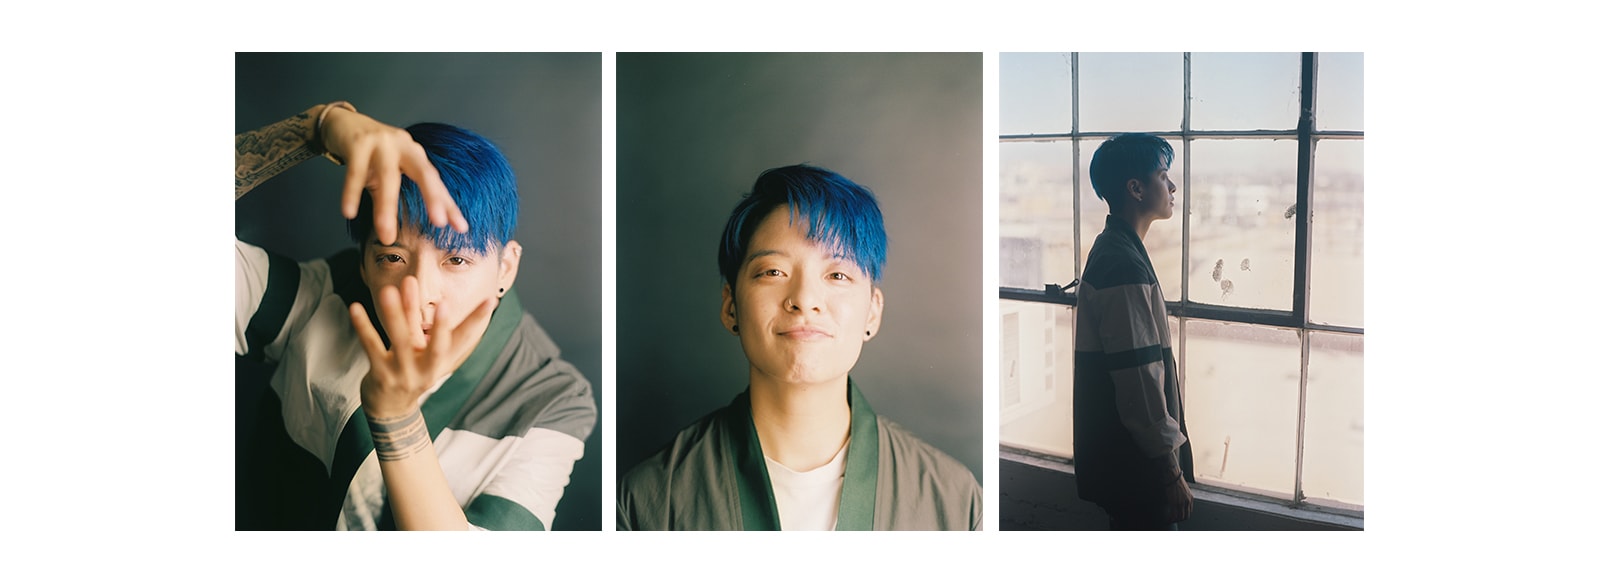 Amber Liu's Iconic Blue Hair Moments - wide 1